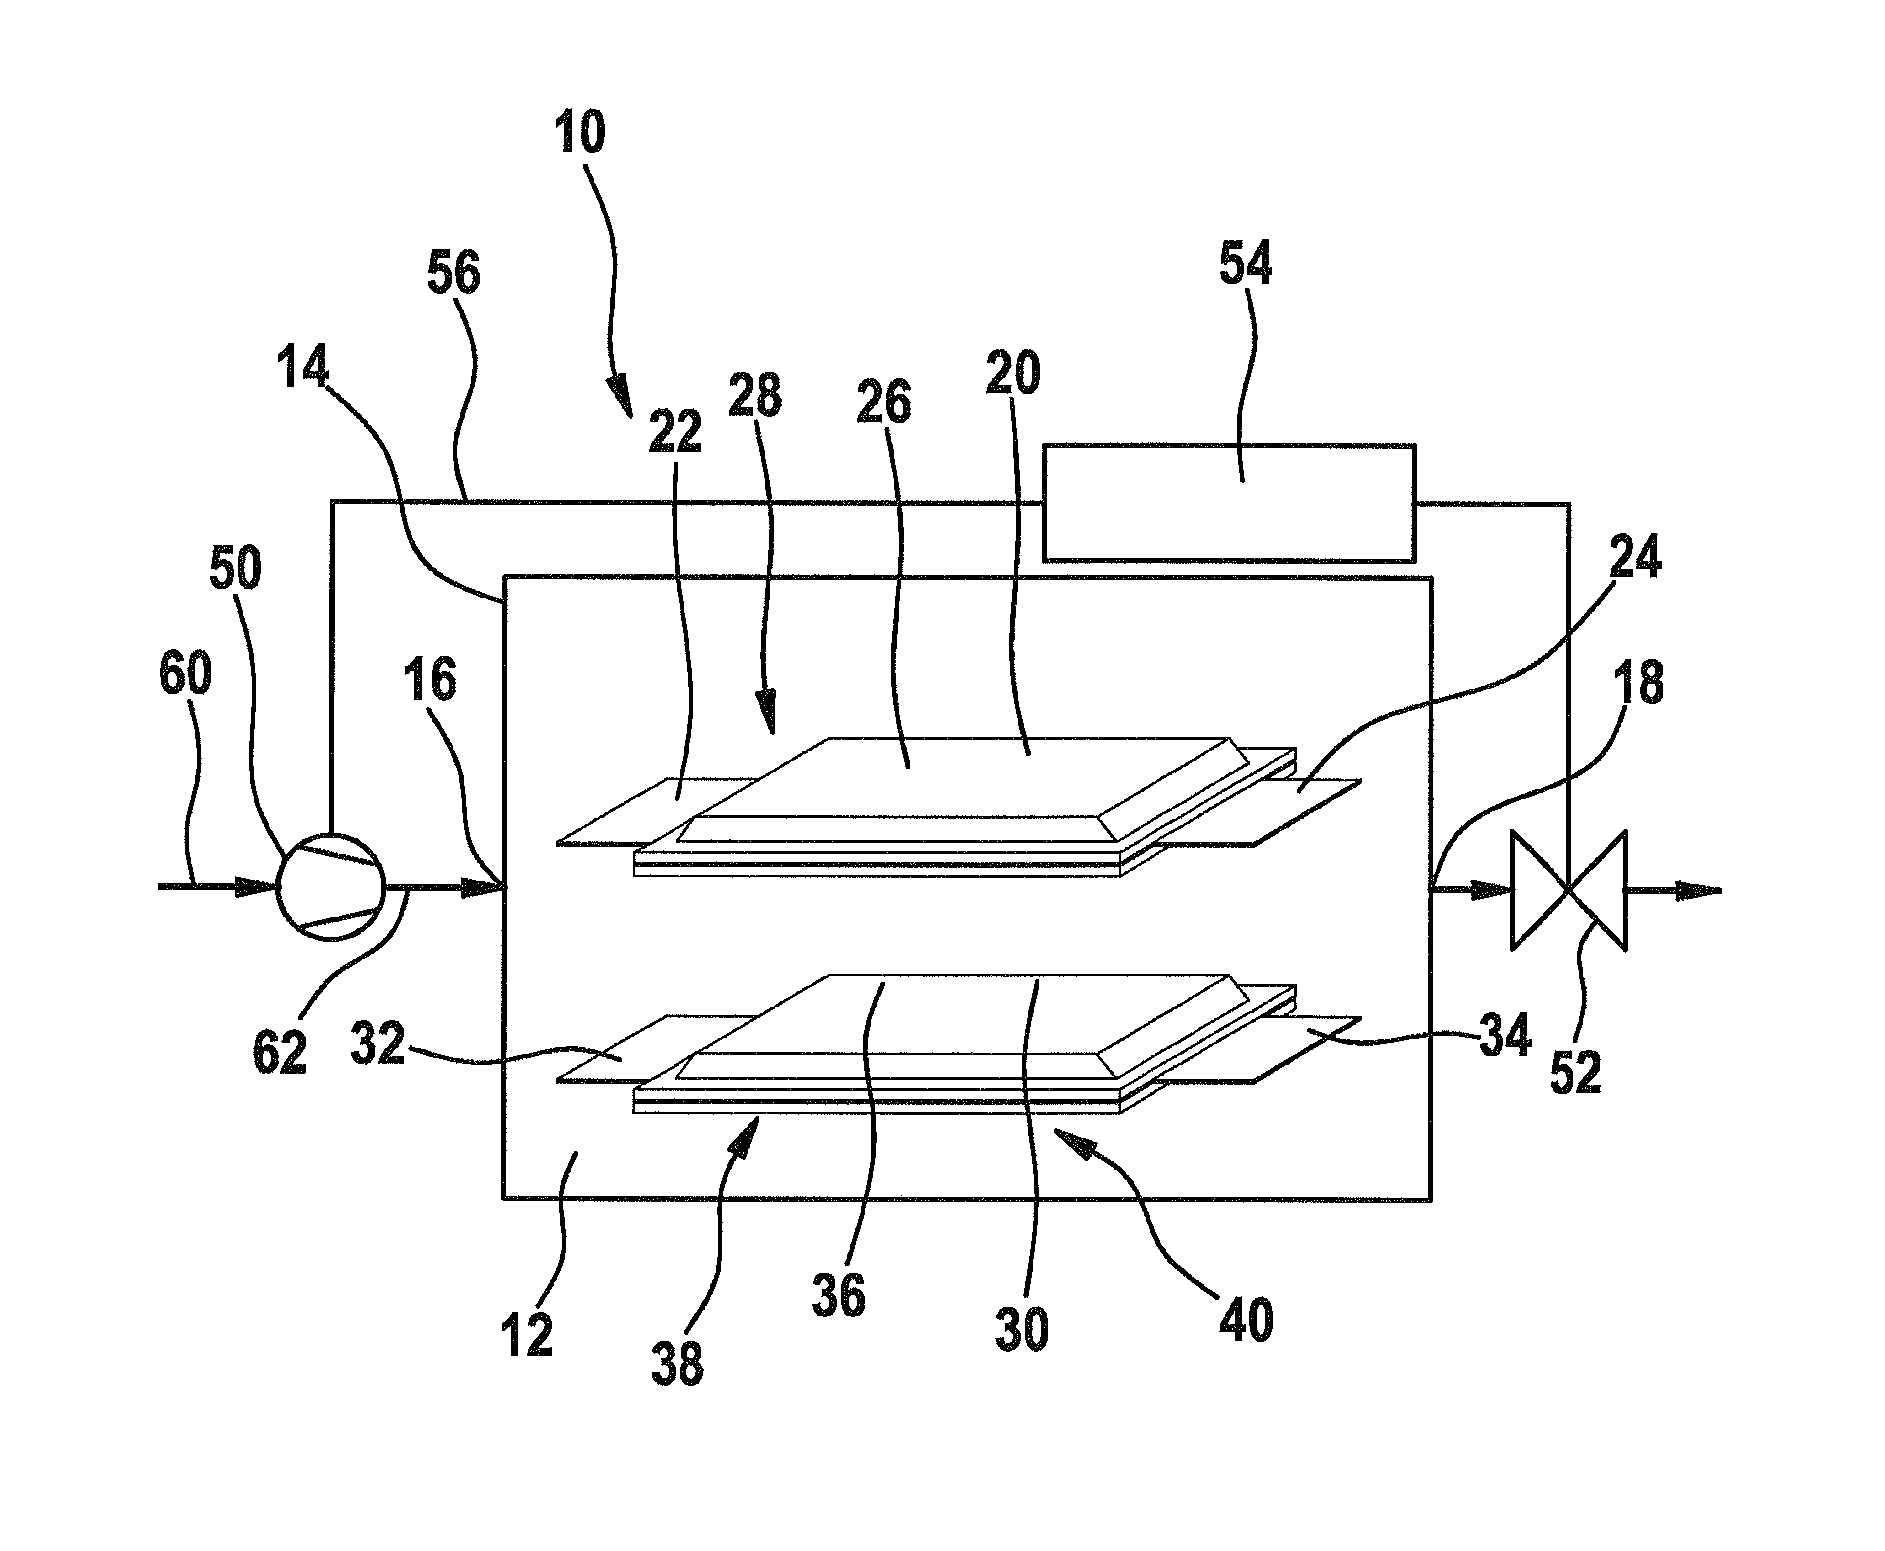 Device having at least one electrochemical cell, and method for operating a device having at least one electrochemical cell